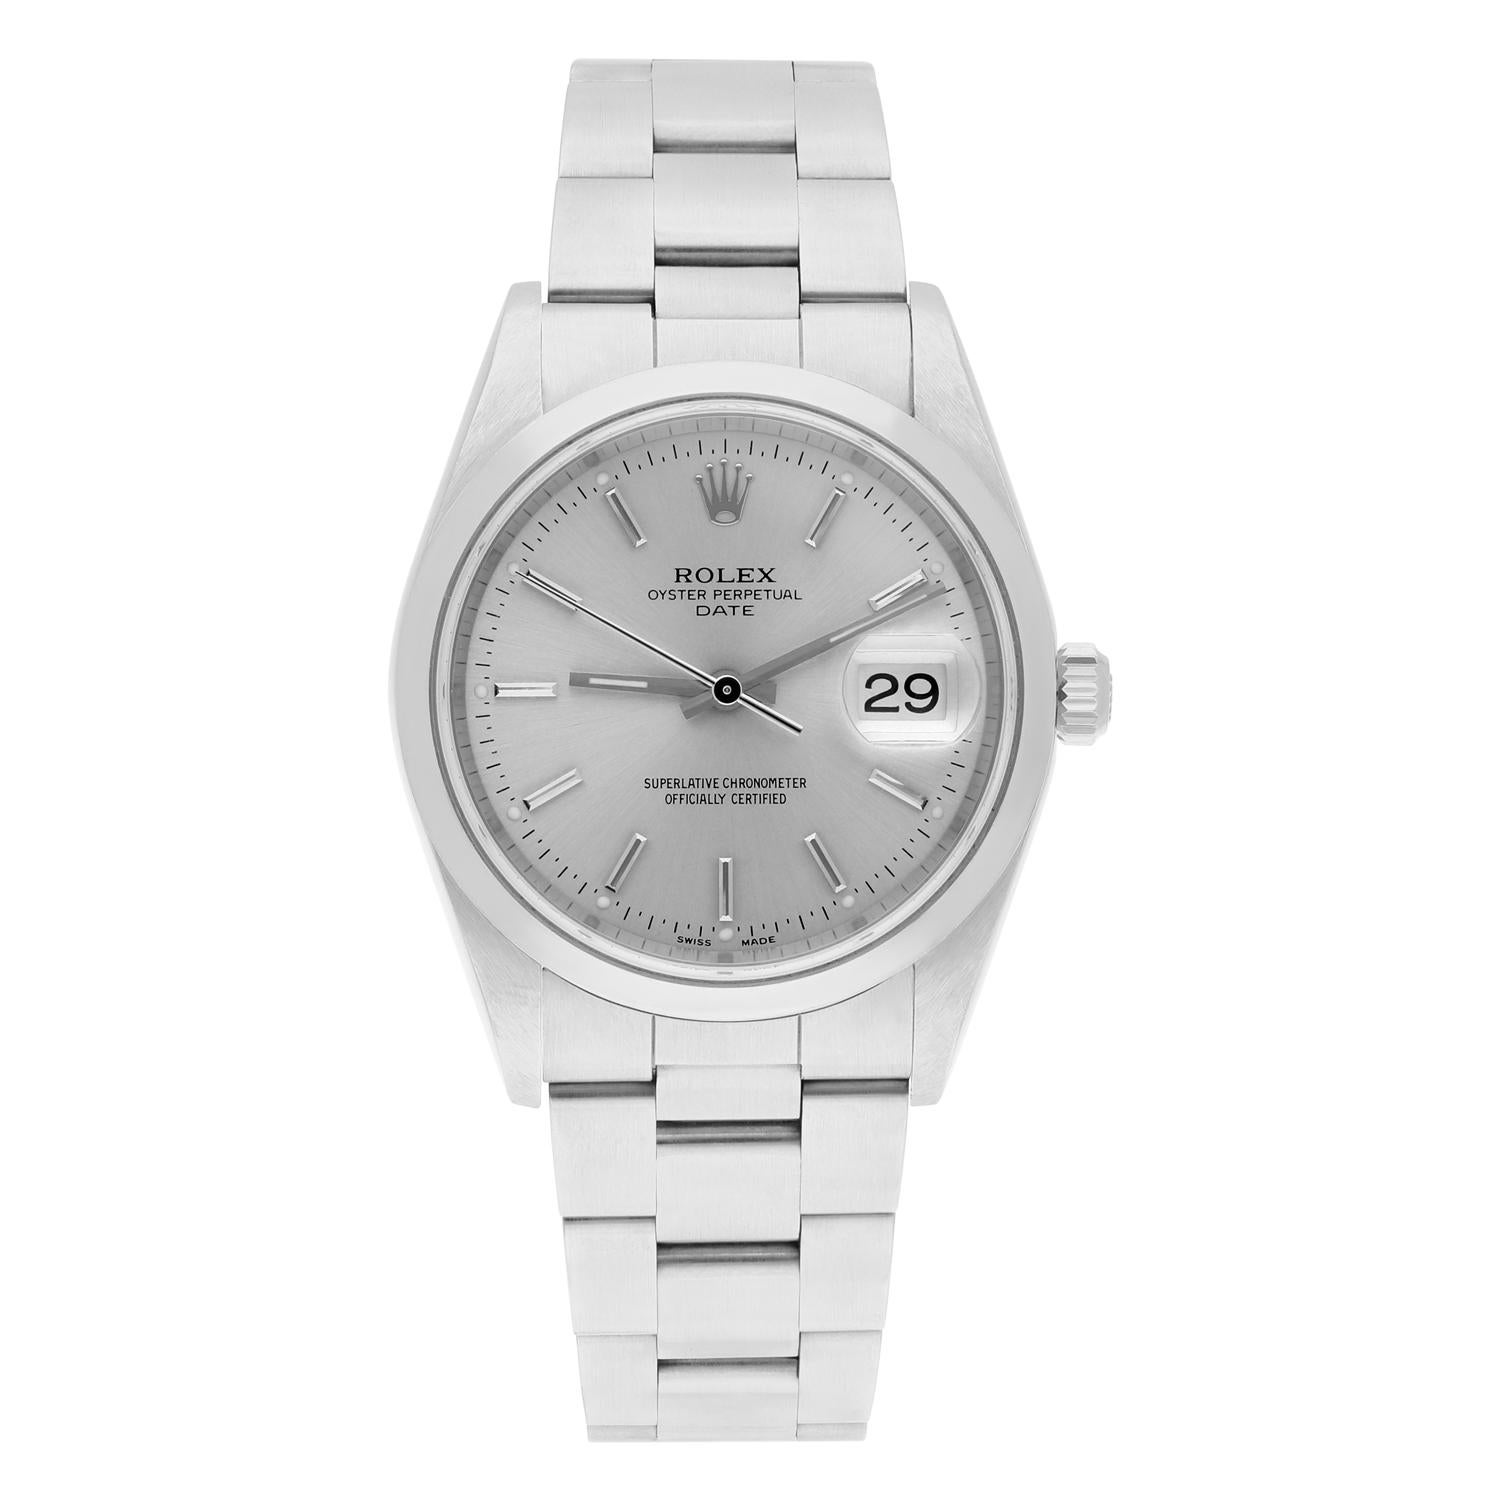 Rolex Date 34mm Stainless Steel Watch Oyster Band Silver Dial Circa 2001 15200

Watch has been professionally polished, serviced and does not have any visible scratches or blemishes. Authenticity guaranteed! The sale comes with a jewelry box and